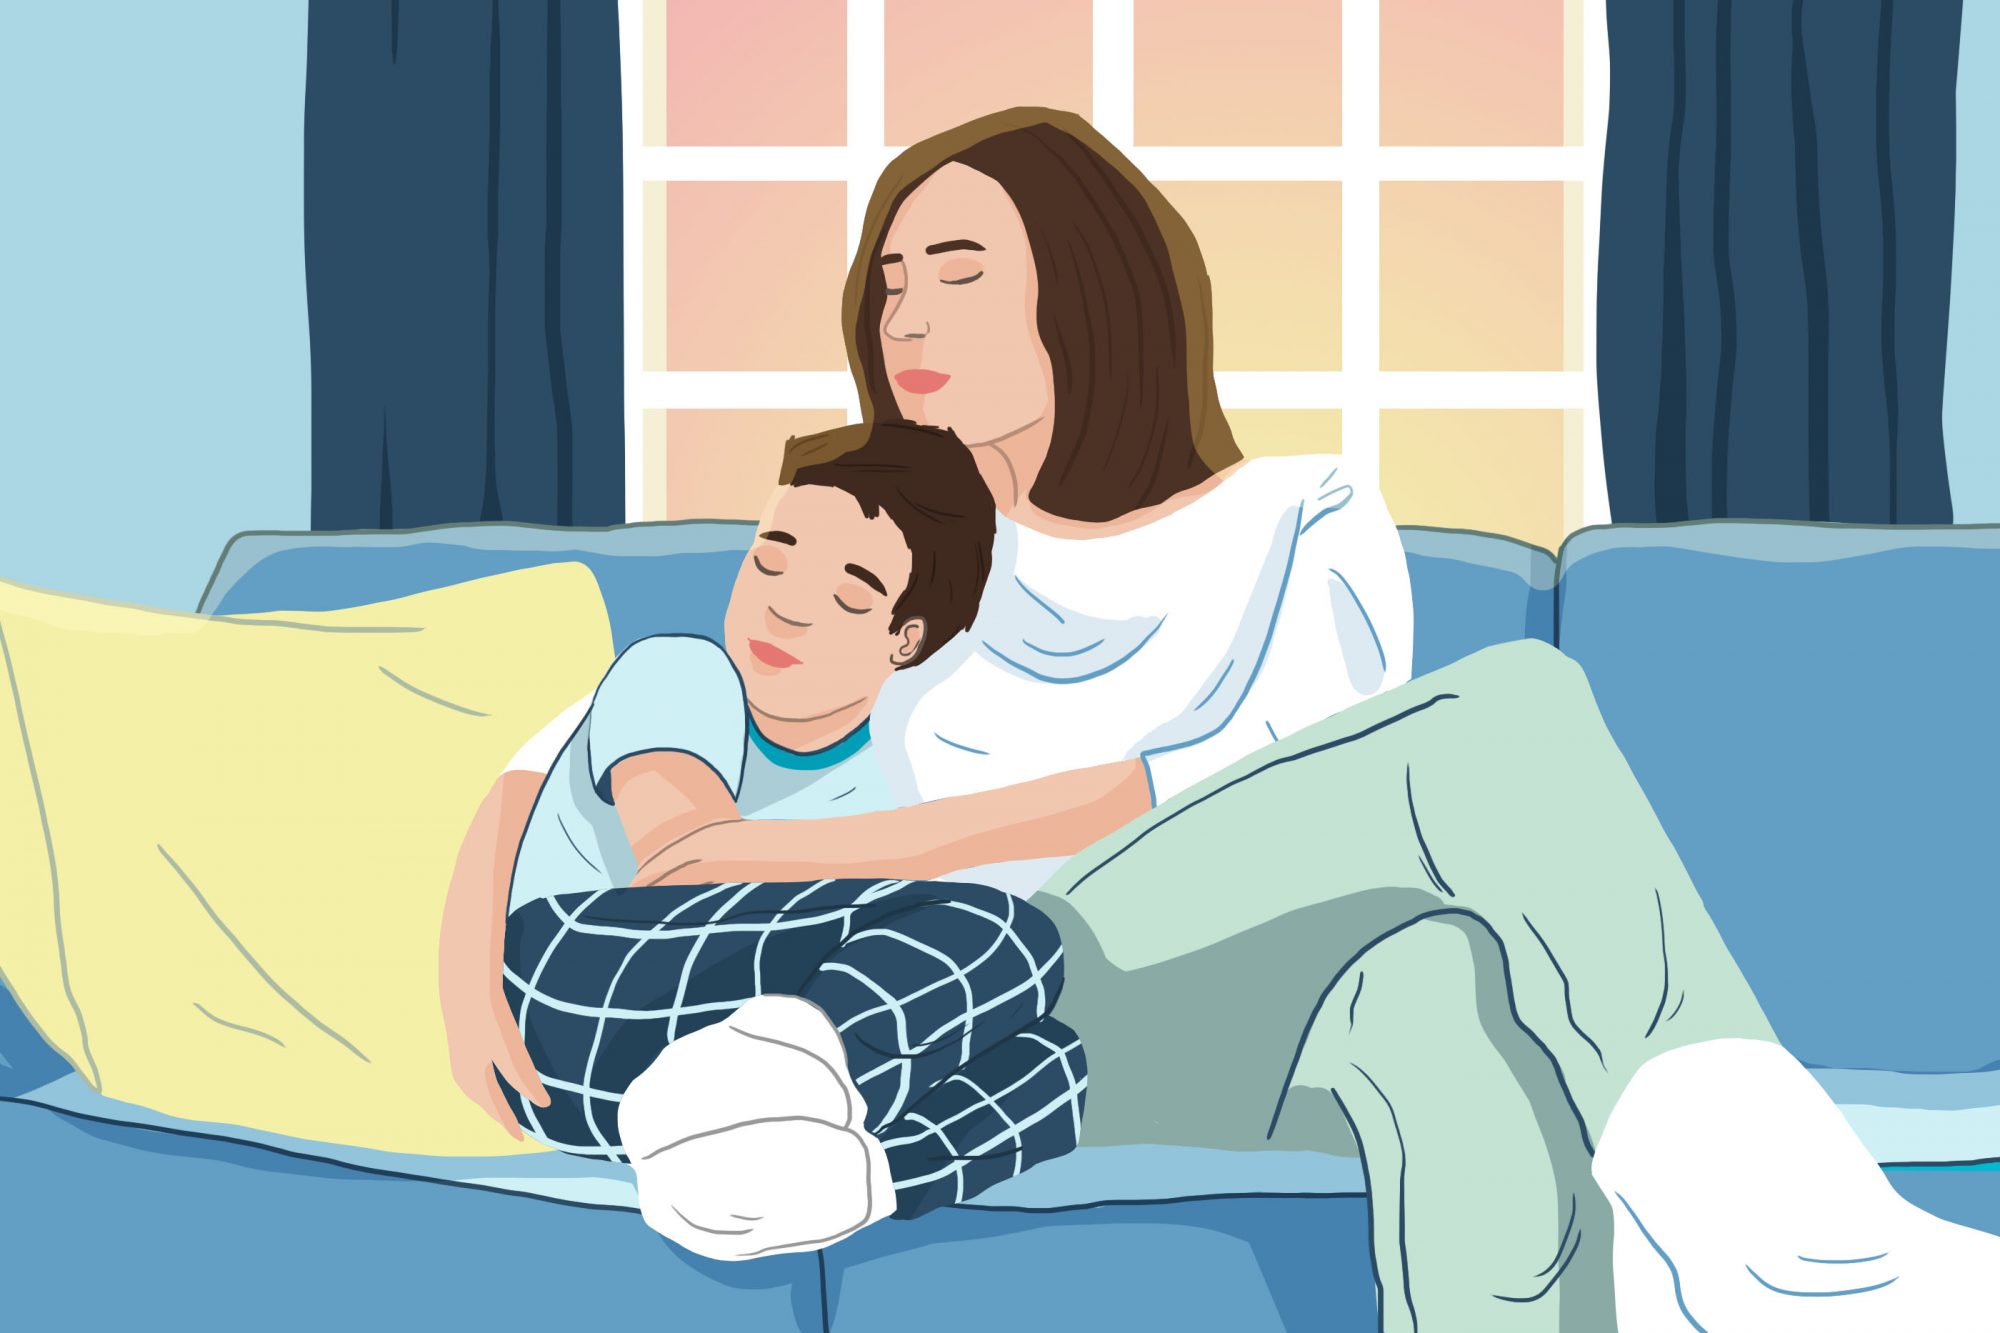 An illustration of a mother and her son.